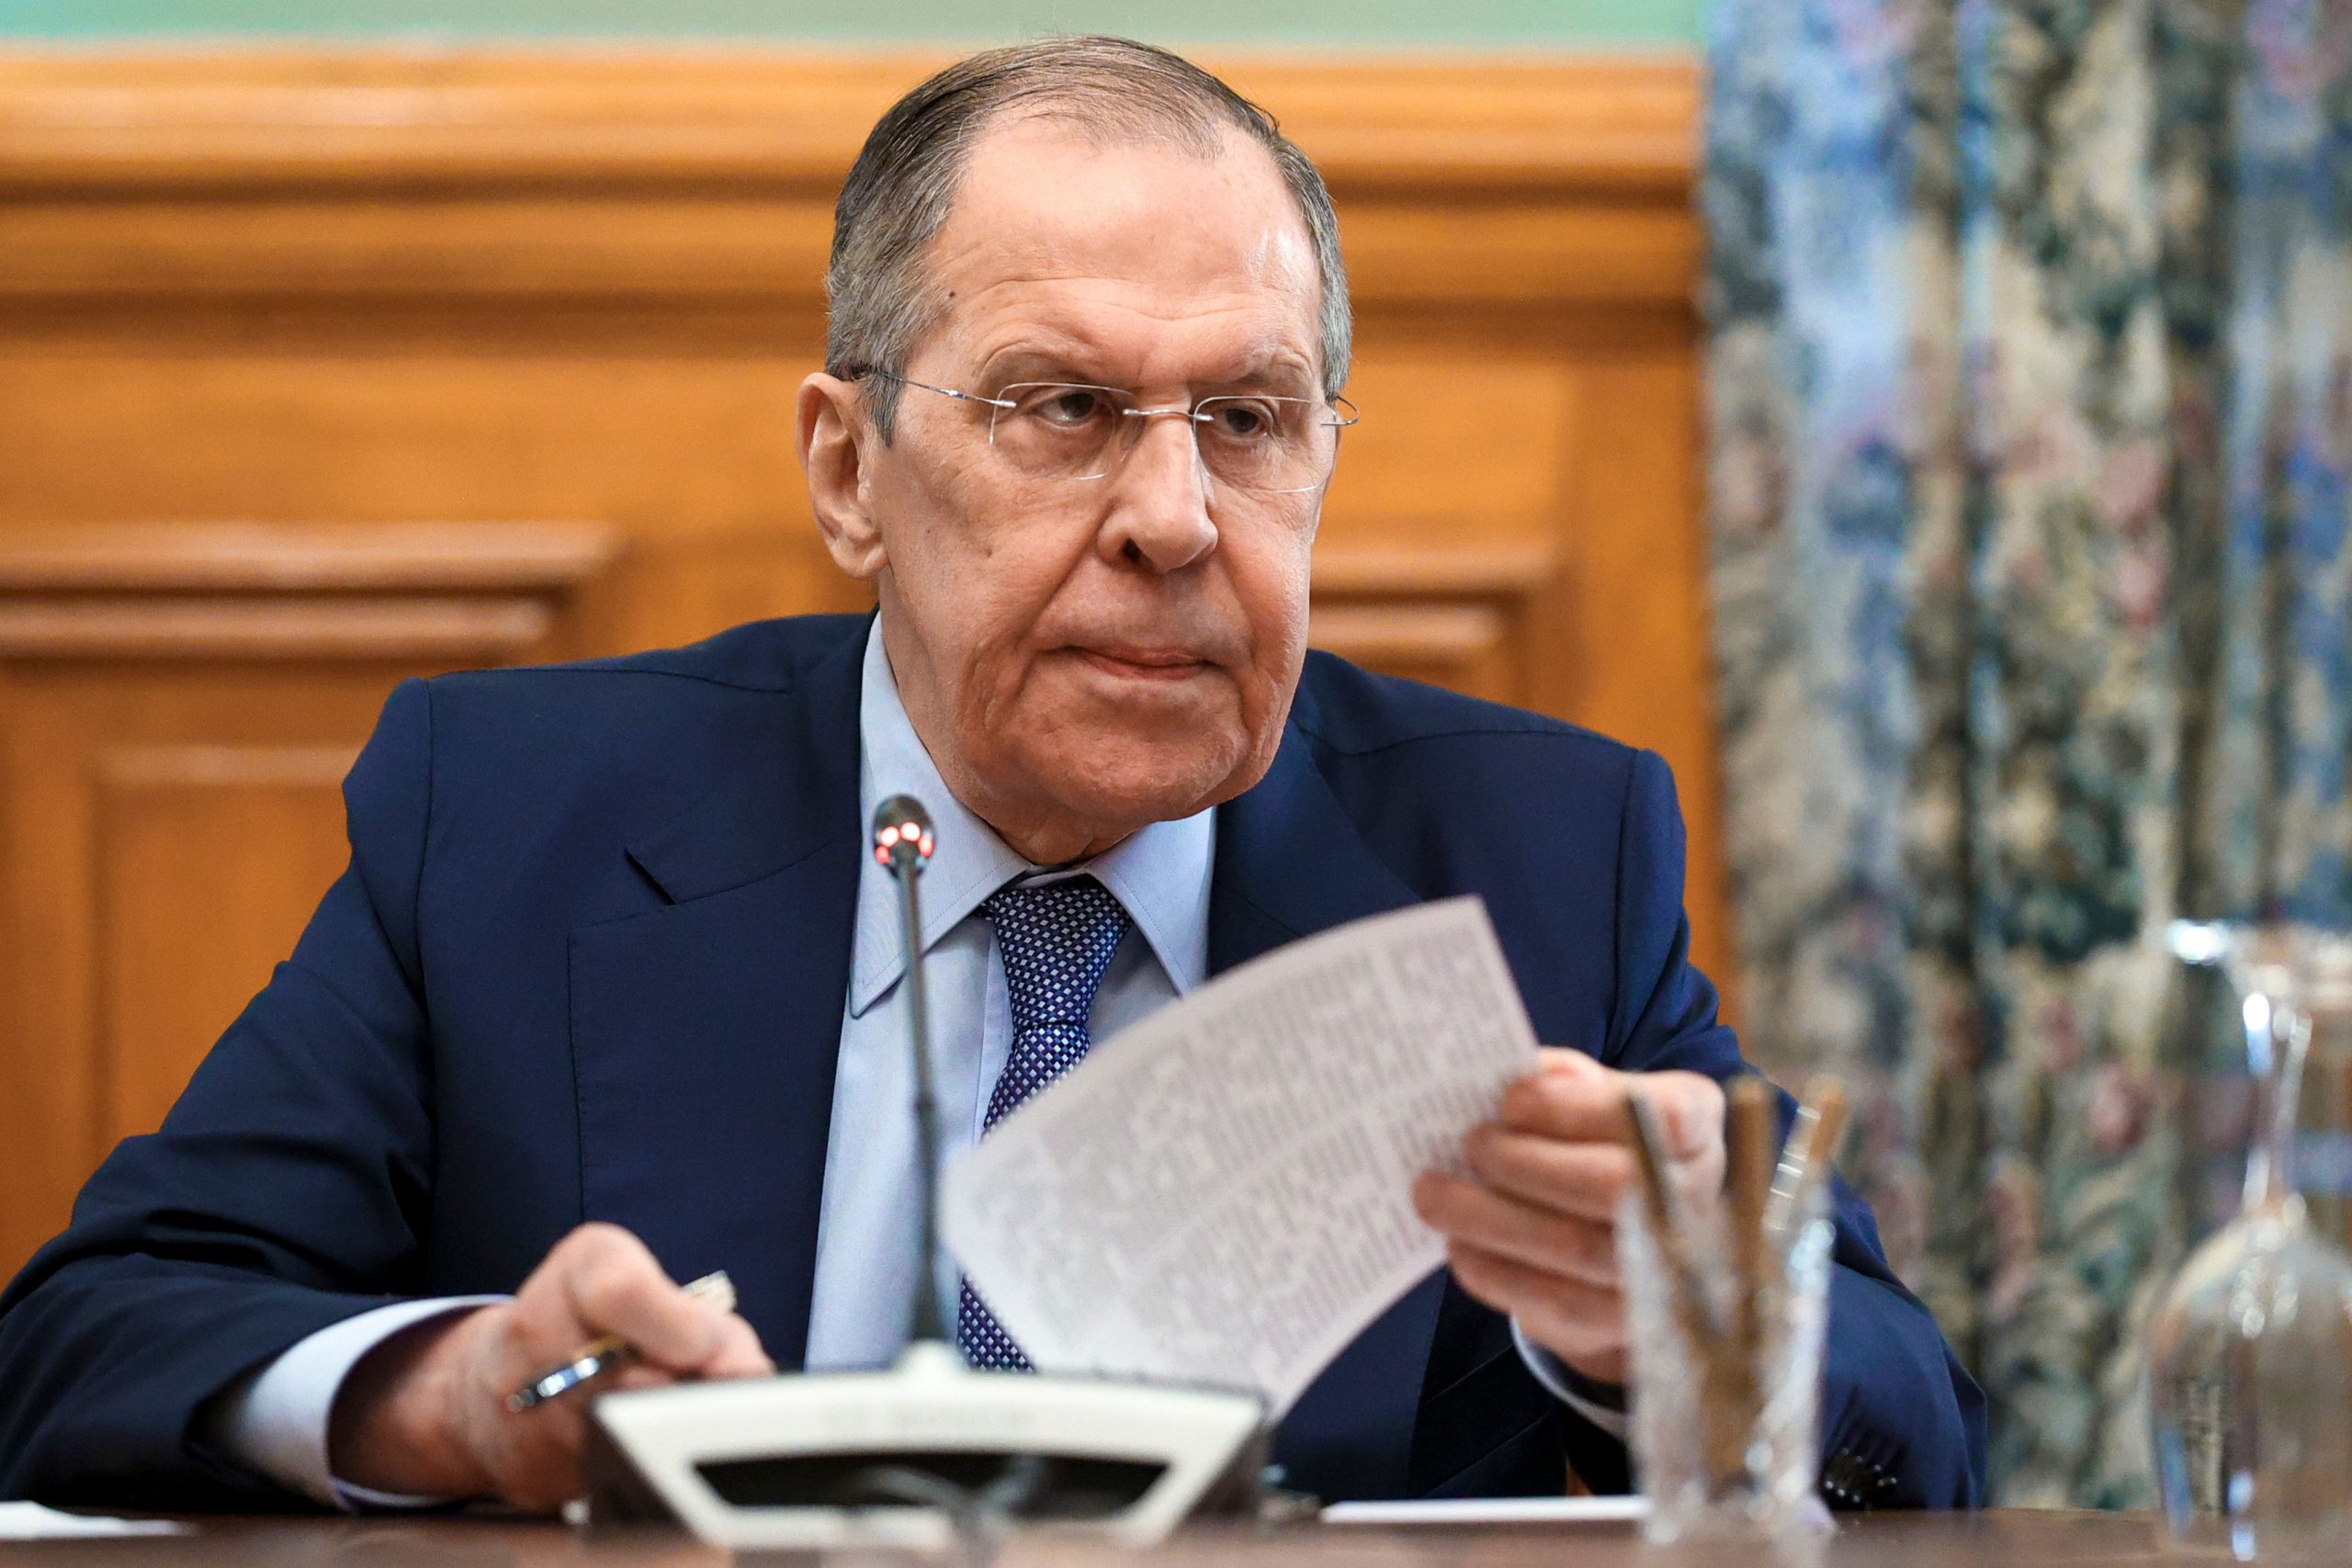 Russia’s Lavrov says there is ‘danger’ of Ukraine acquiring nuclear weapons